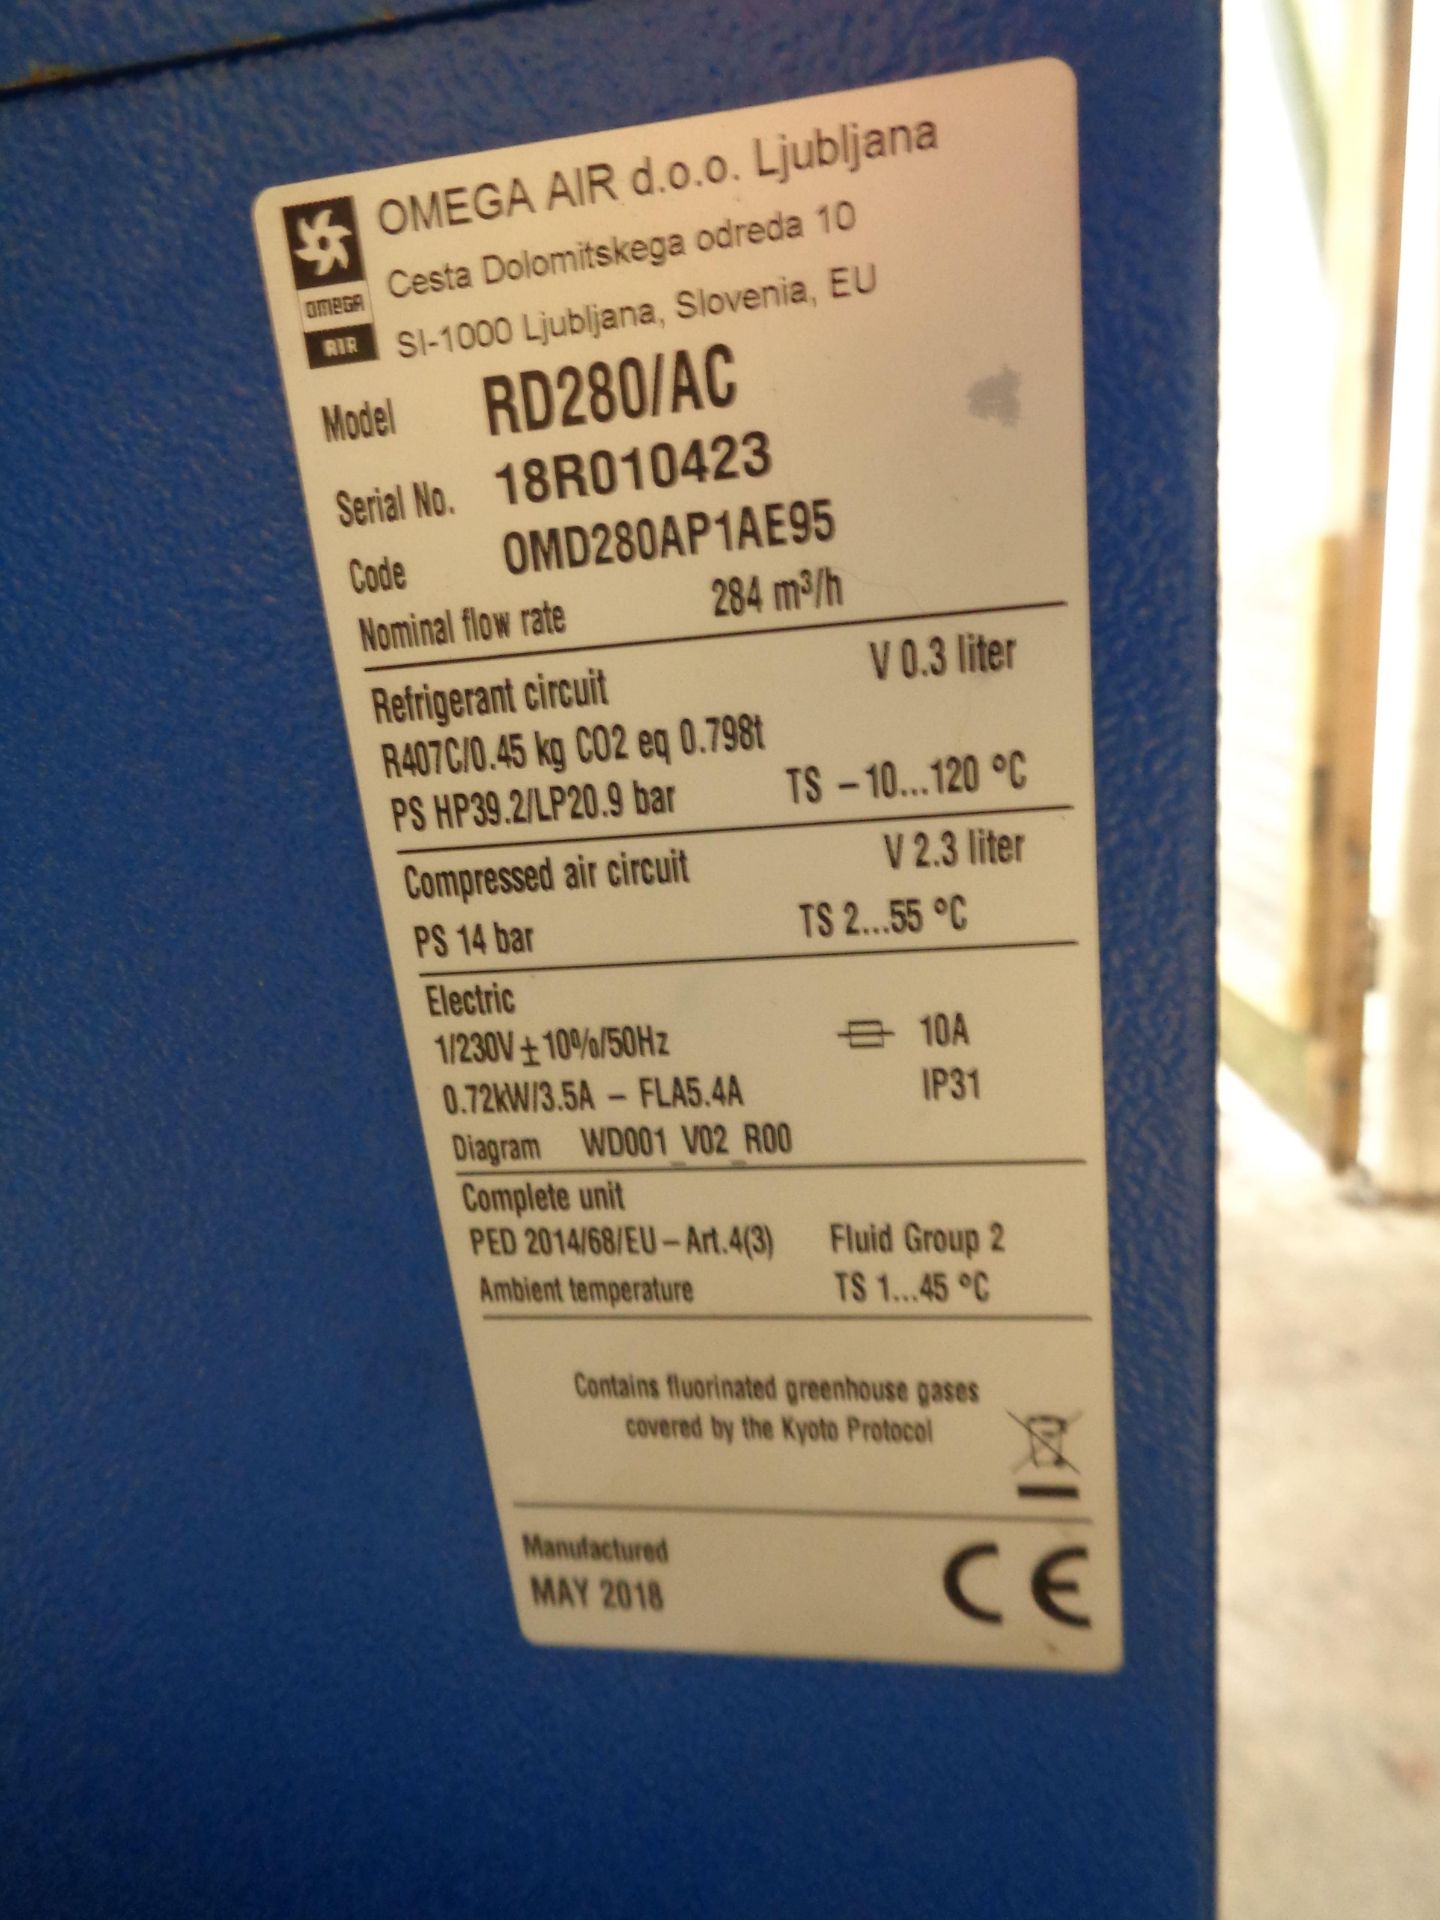 Omega Air RD280/AC air dryer serial no. 18R010423 (2018) - Image 2 of 3